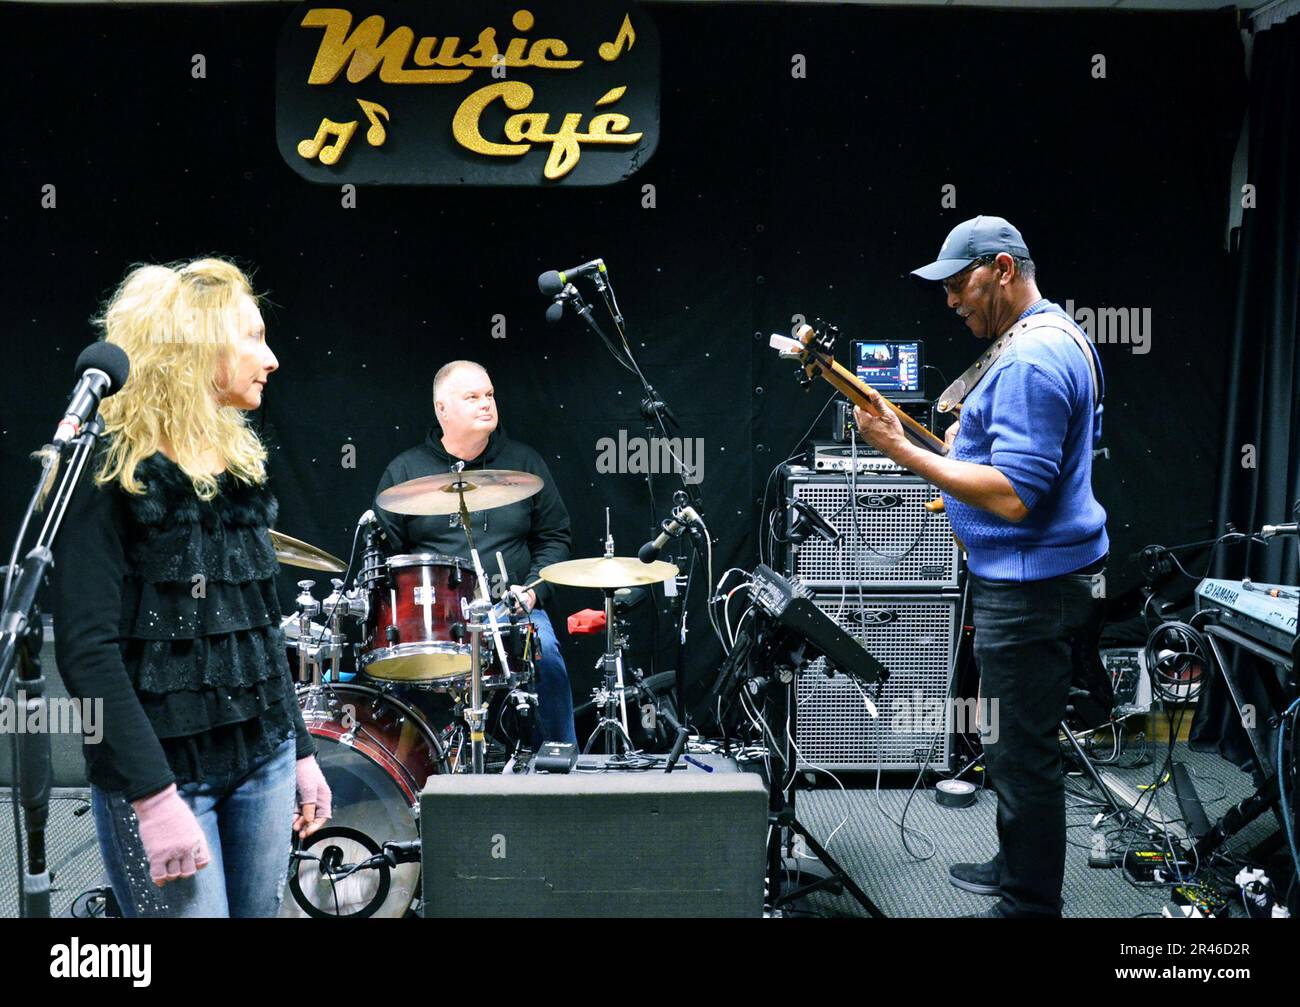 VICENZA, Italy - Barry Robinson, music director, right, plays his bass alongside other musicians, while checking the sound system for the first edition of Music Café Jan. 22, 2023. The monthly event returns to Soldiers’ Theatre after a two-year break for the pandemic. Stock Photo